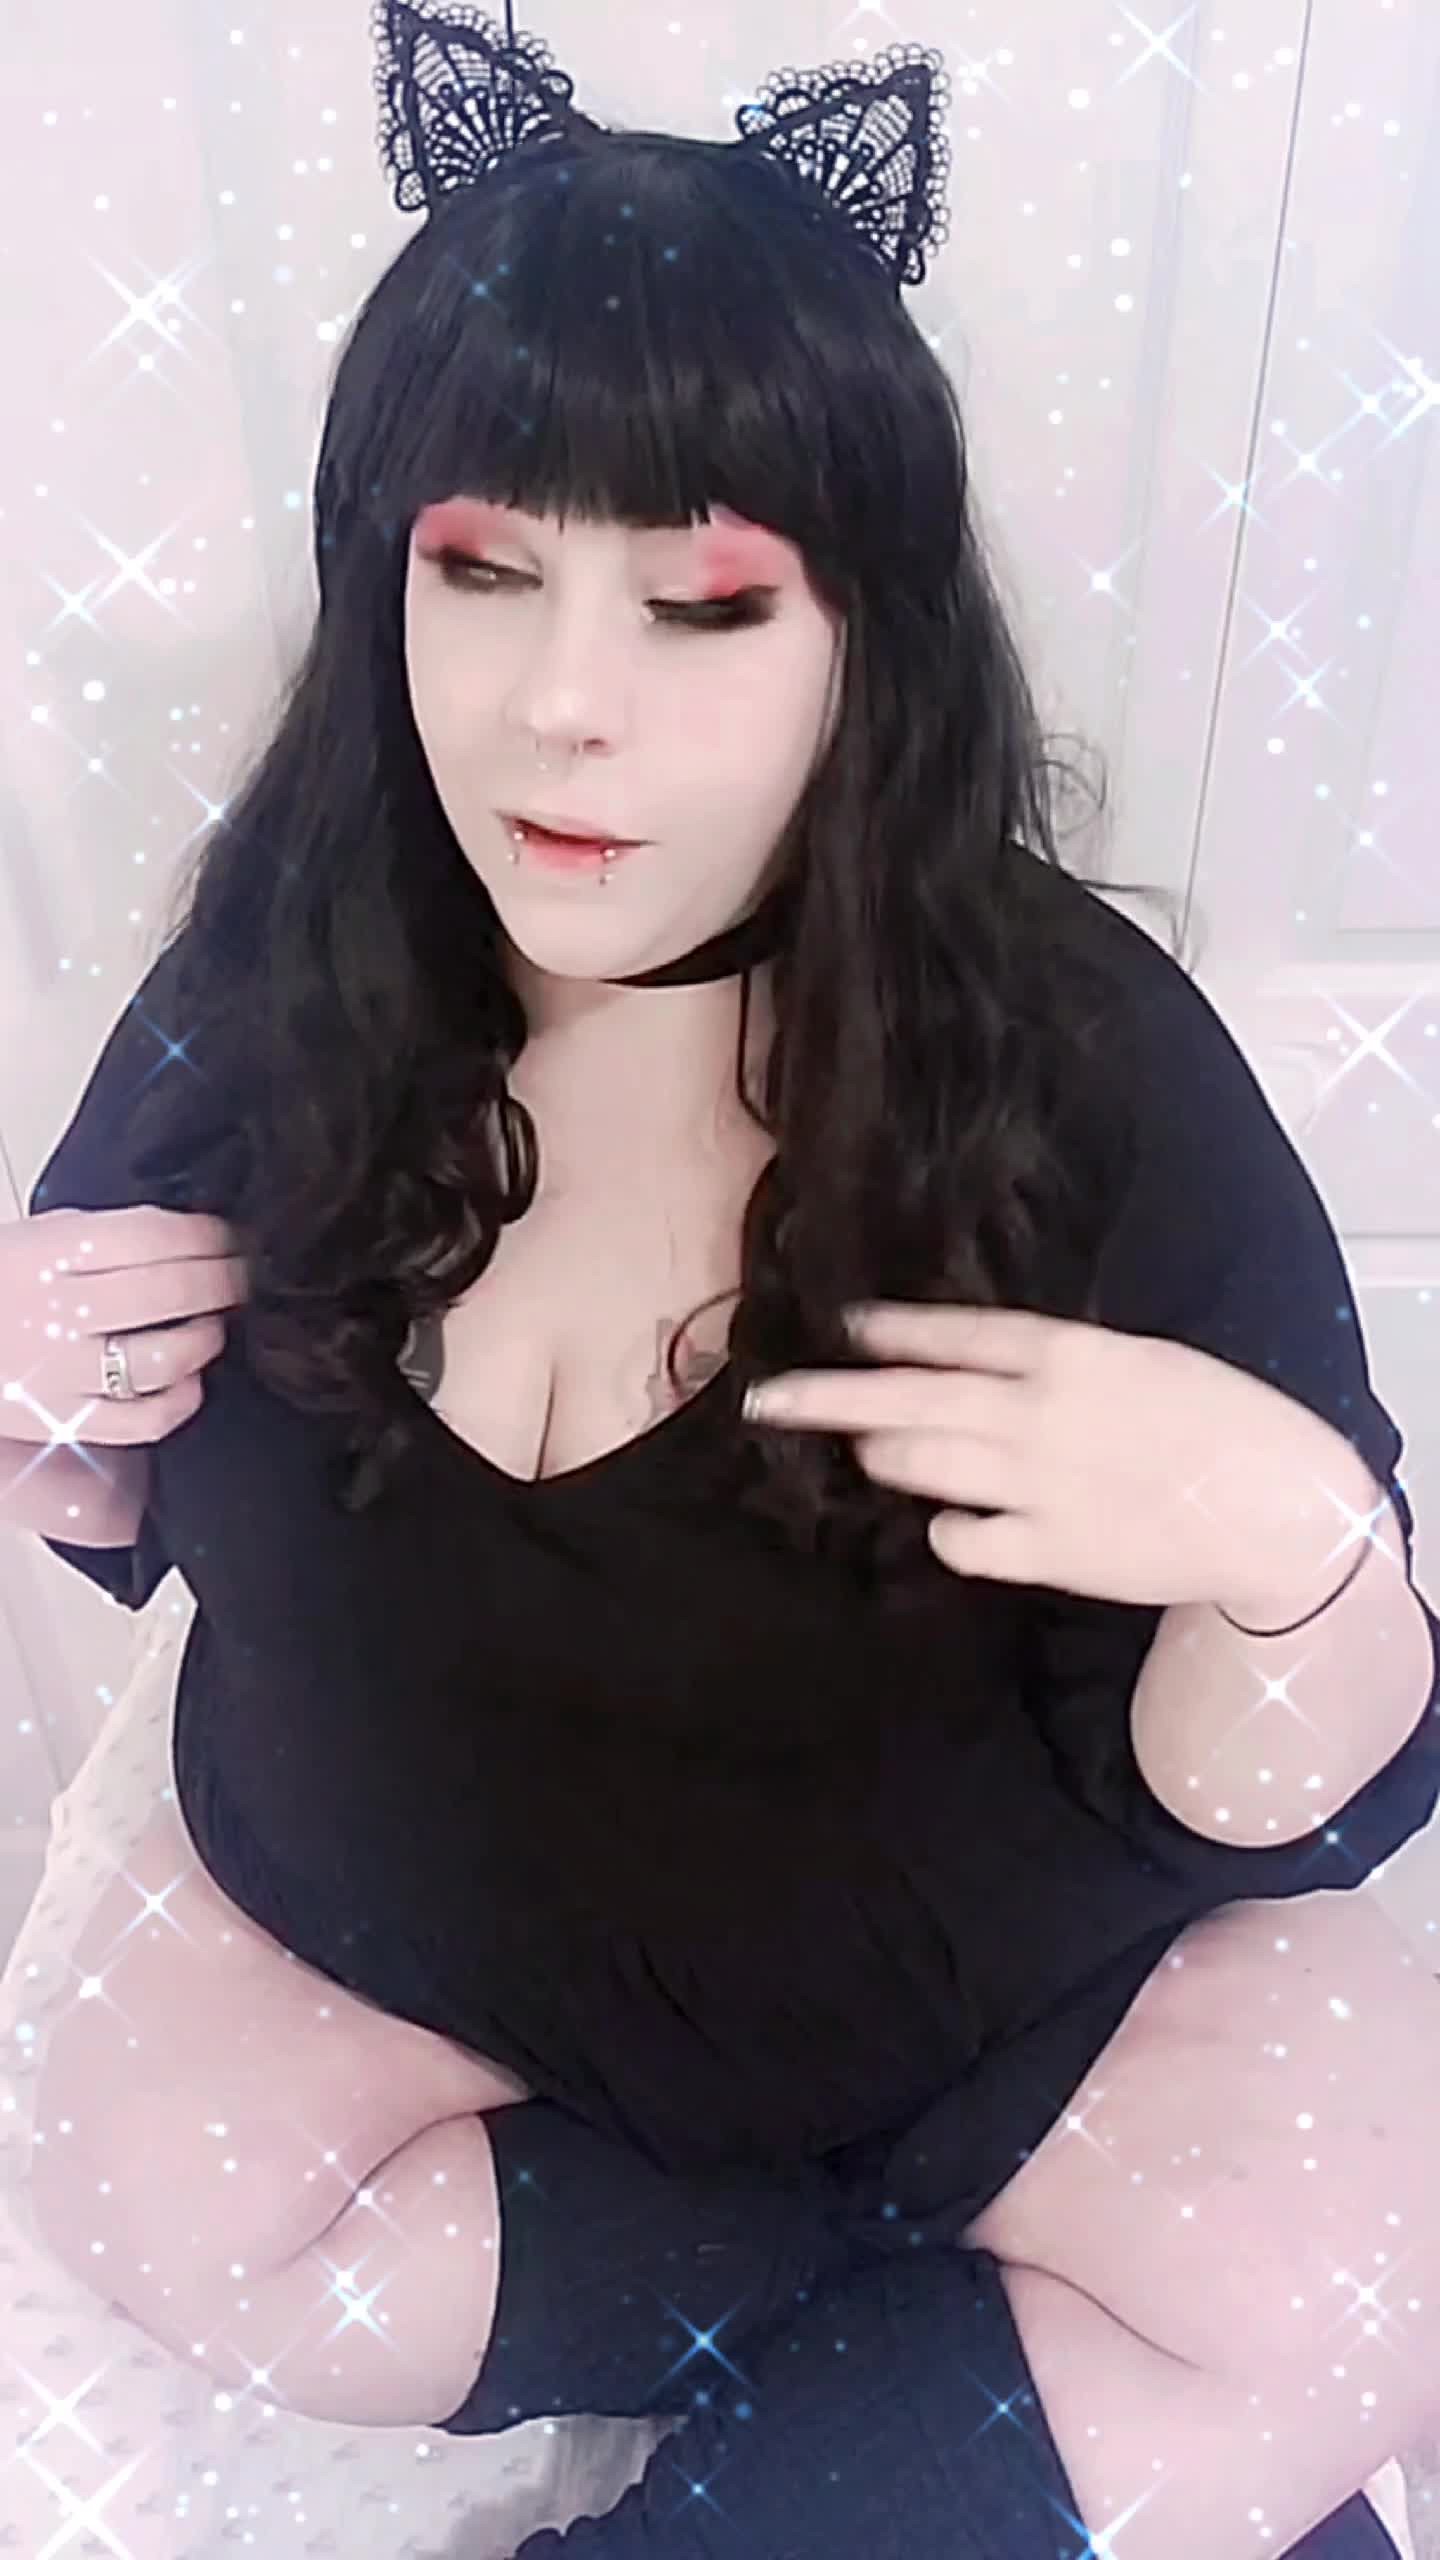 Video by Lilpixie73tiktok with the username @Lilpixie73tiktok, who is a verified user,  October 8, 2022 at 5:03 PM and the text says 'https://onlyfans.com/lilpixie73
Join for only 10$ 🔓
#bbw #goth #cosplay #juicypussy #juicy #panties #penetracion #masterbation #onlyfans #nsfwtwt #tittyplay #spicysite #gothfetish #squirting #vapefetish #erotic #xxx #gaping #adultcontent #plussize..'